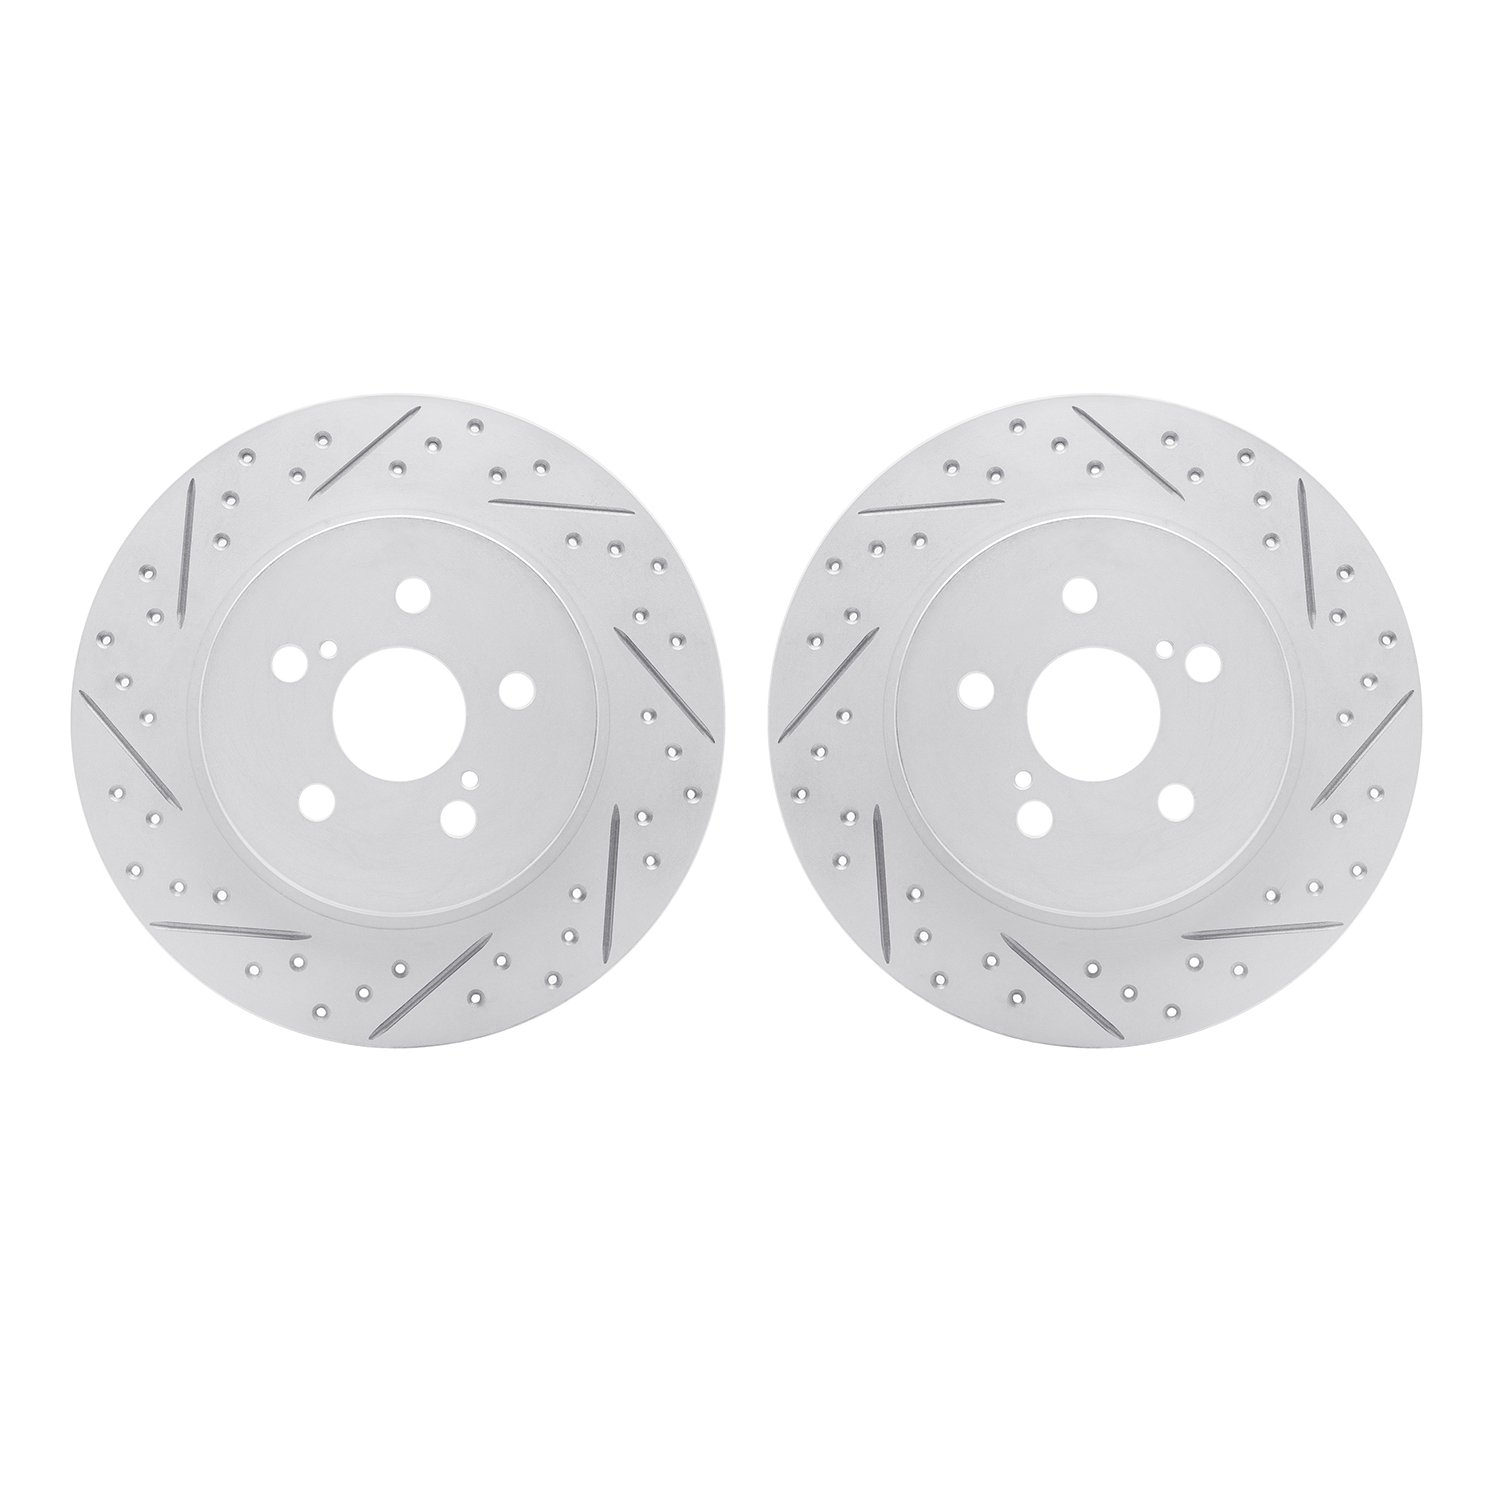 2002-75015 Geoperformance Drilled/Slotted Brake Rotors, 2011-2017 Lexus/Toyota/Scion, Position: Rear